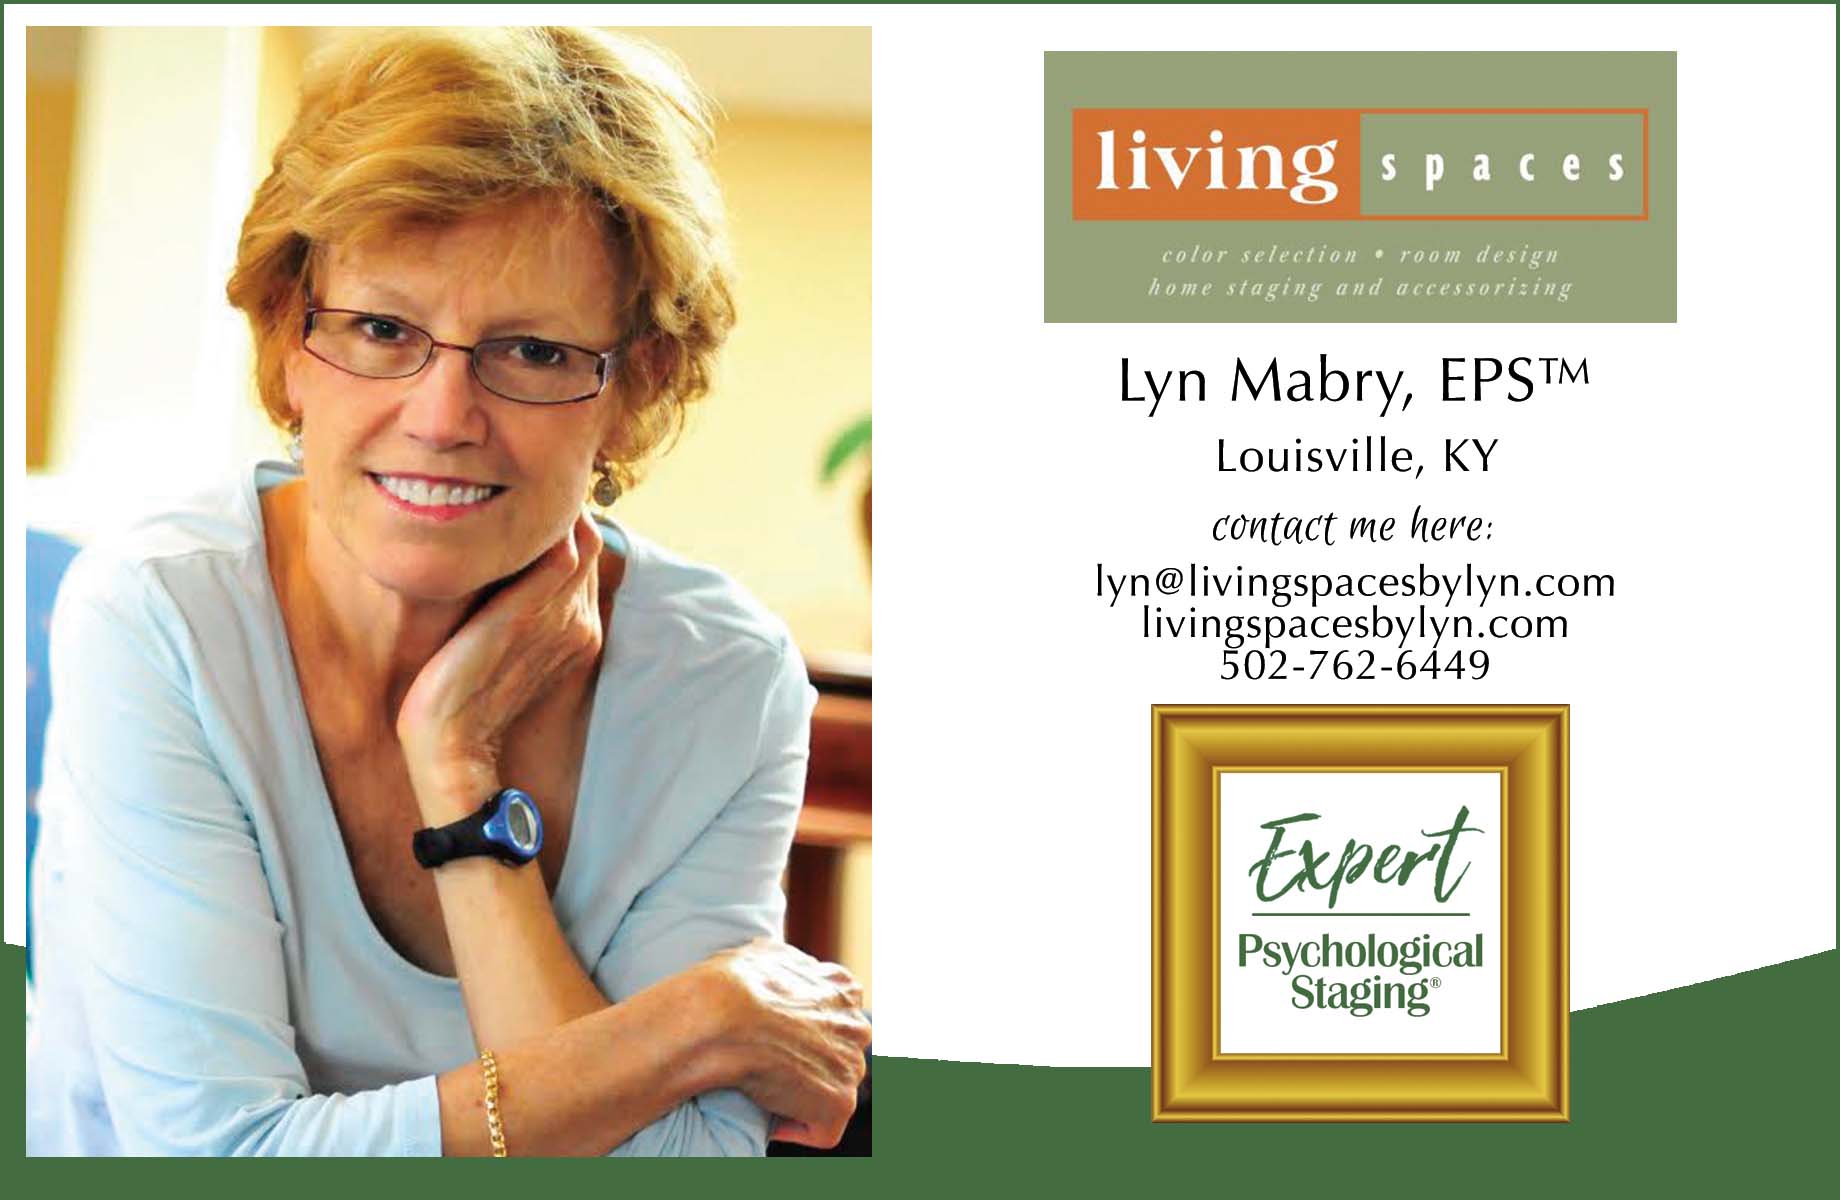 Lyn Mabry - Expert Psychological Staging Louisville KY